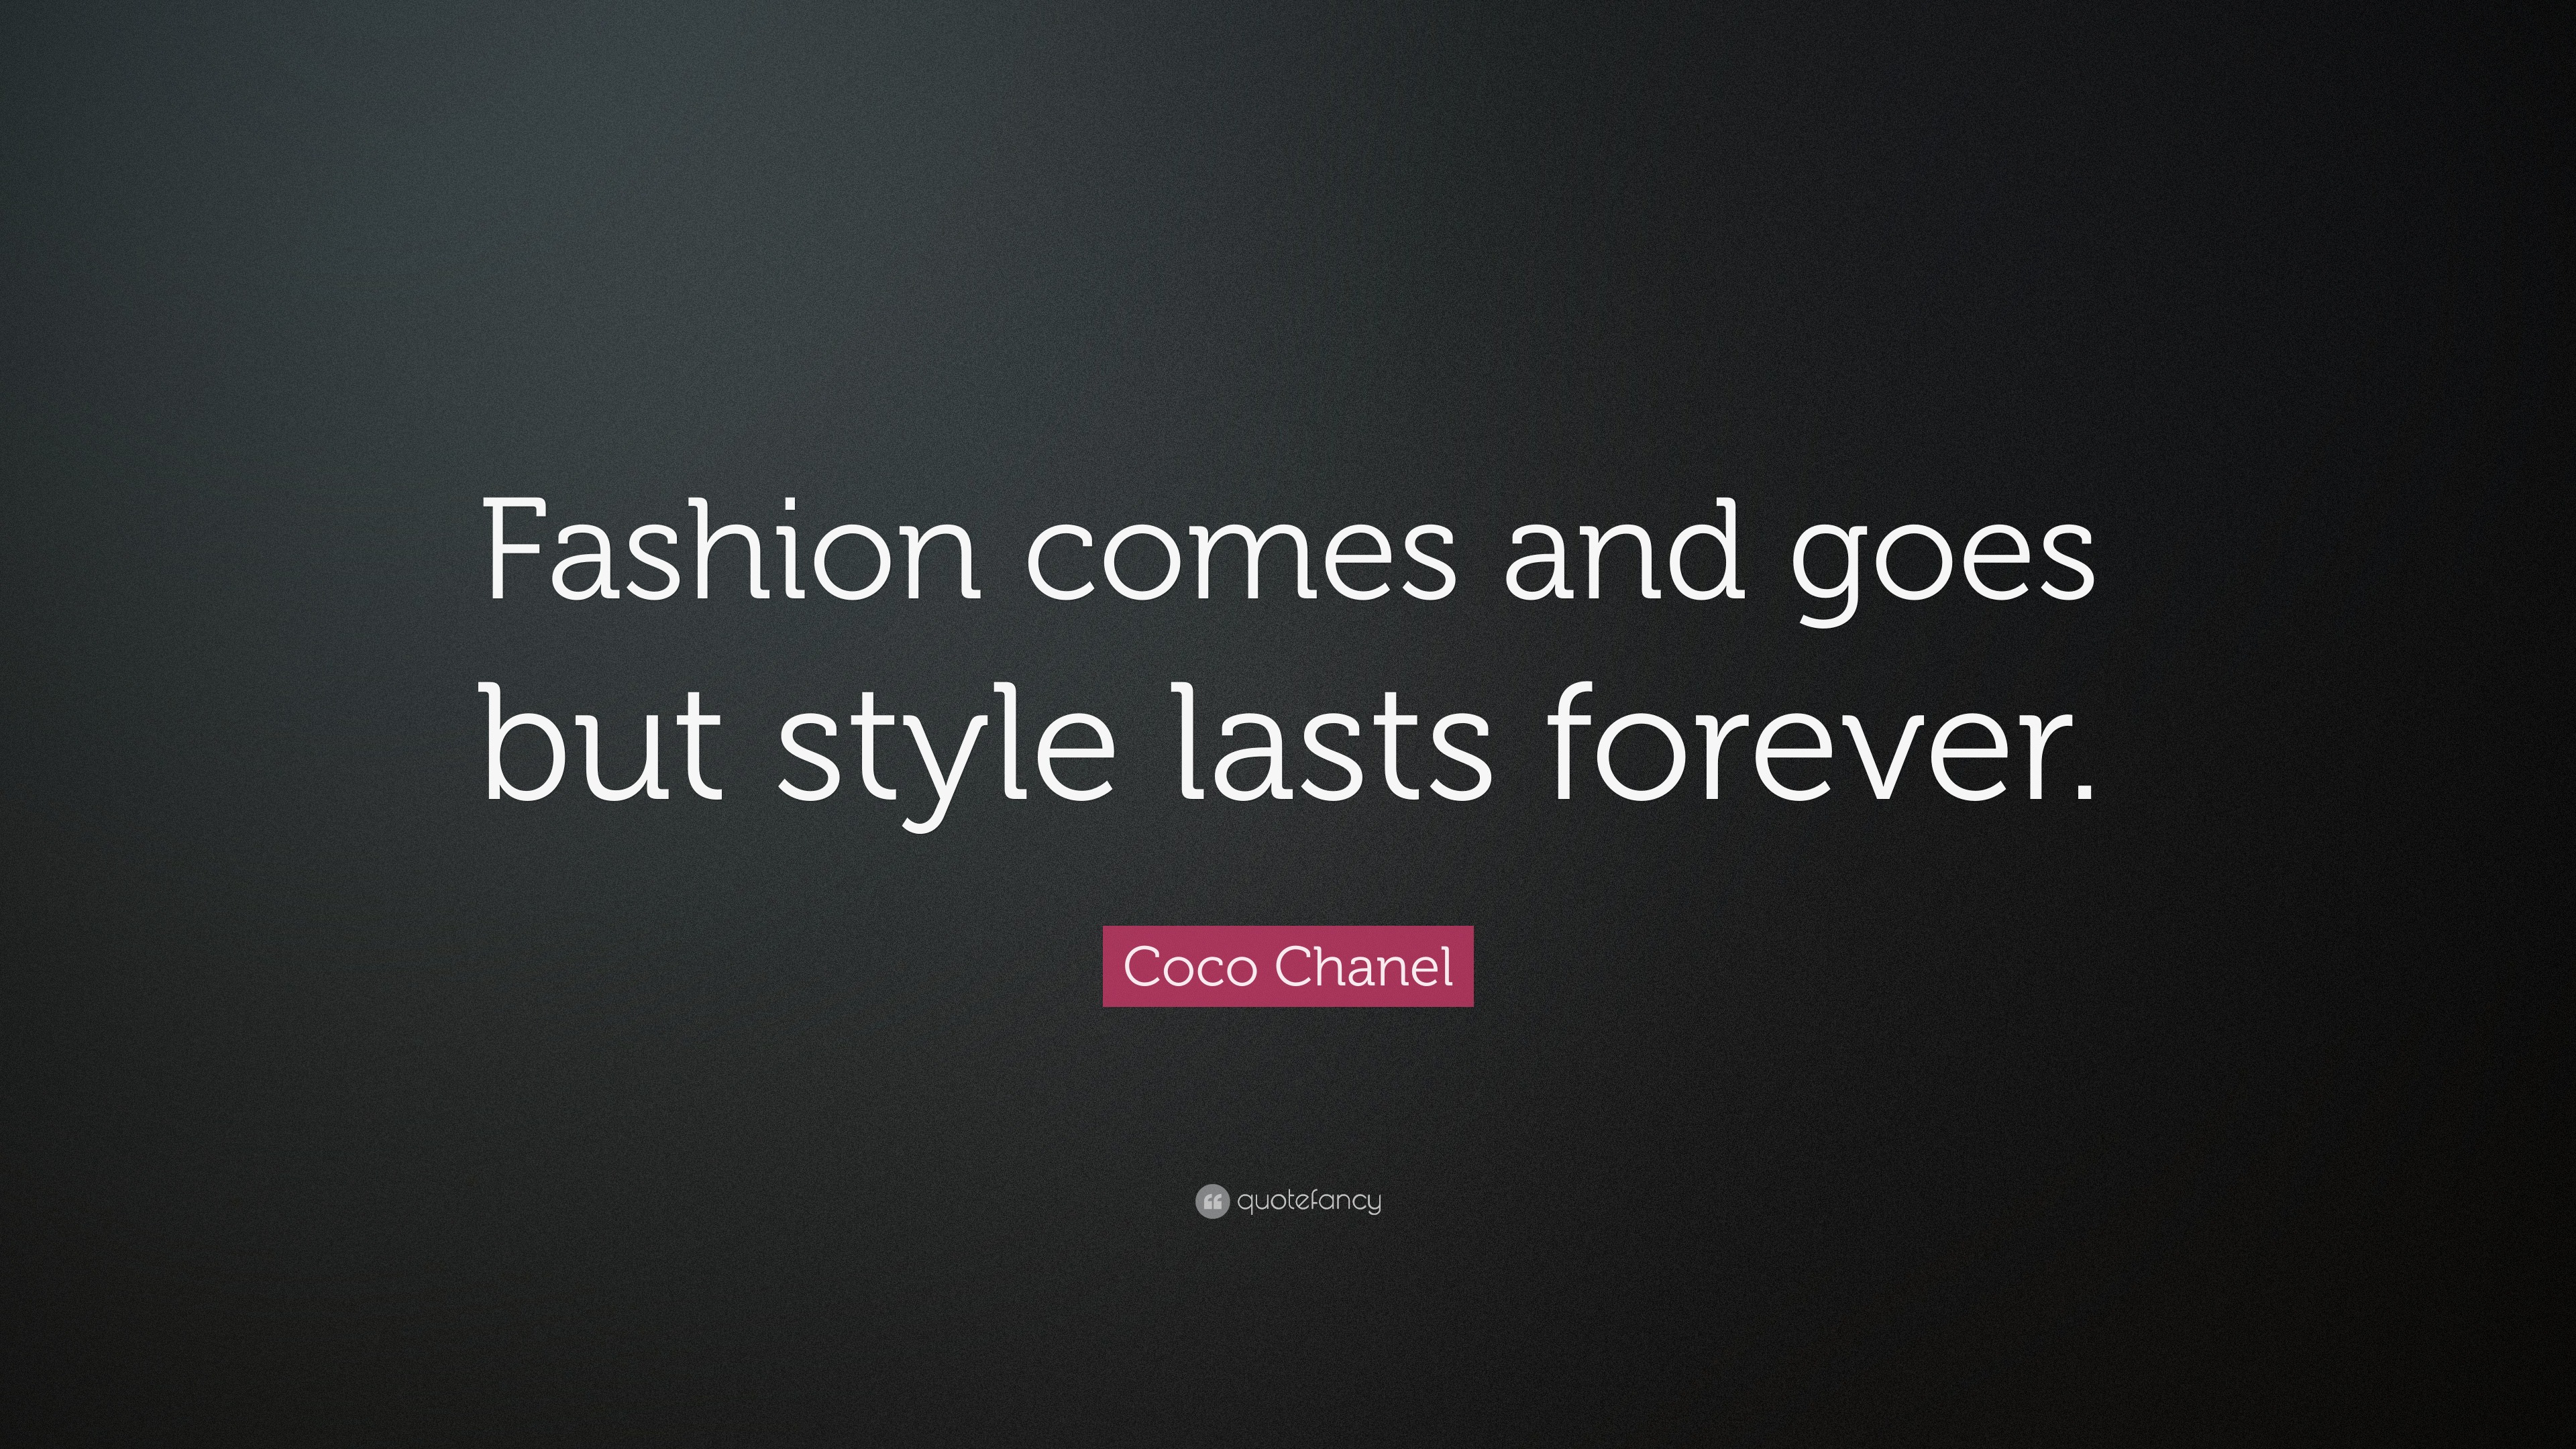 25 Of The Best Coco Chanel Quotes On Fashion and True Style   Inspirationfeed